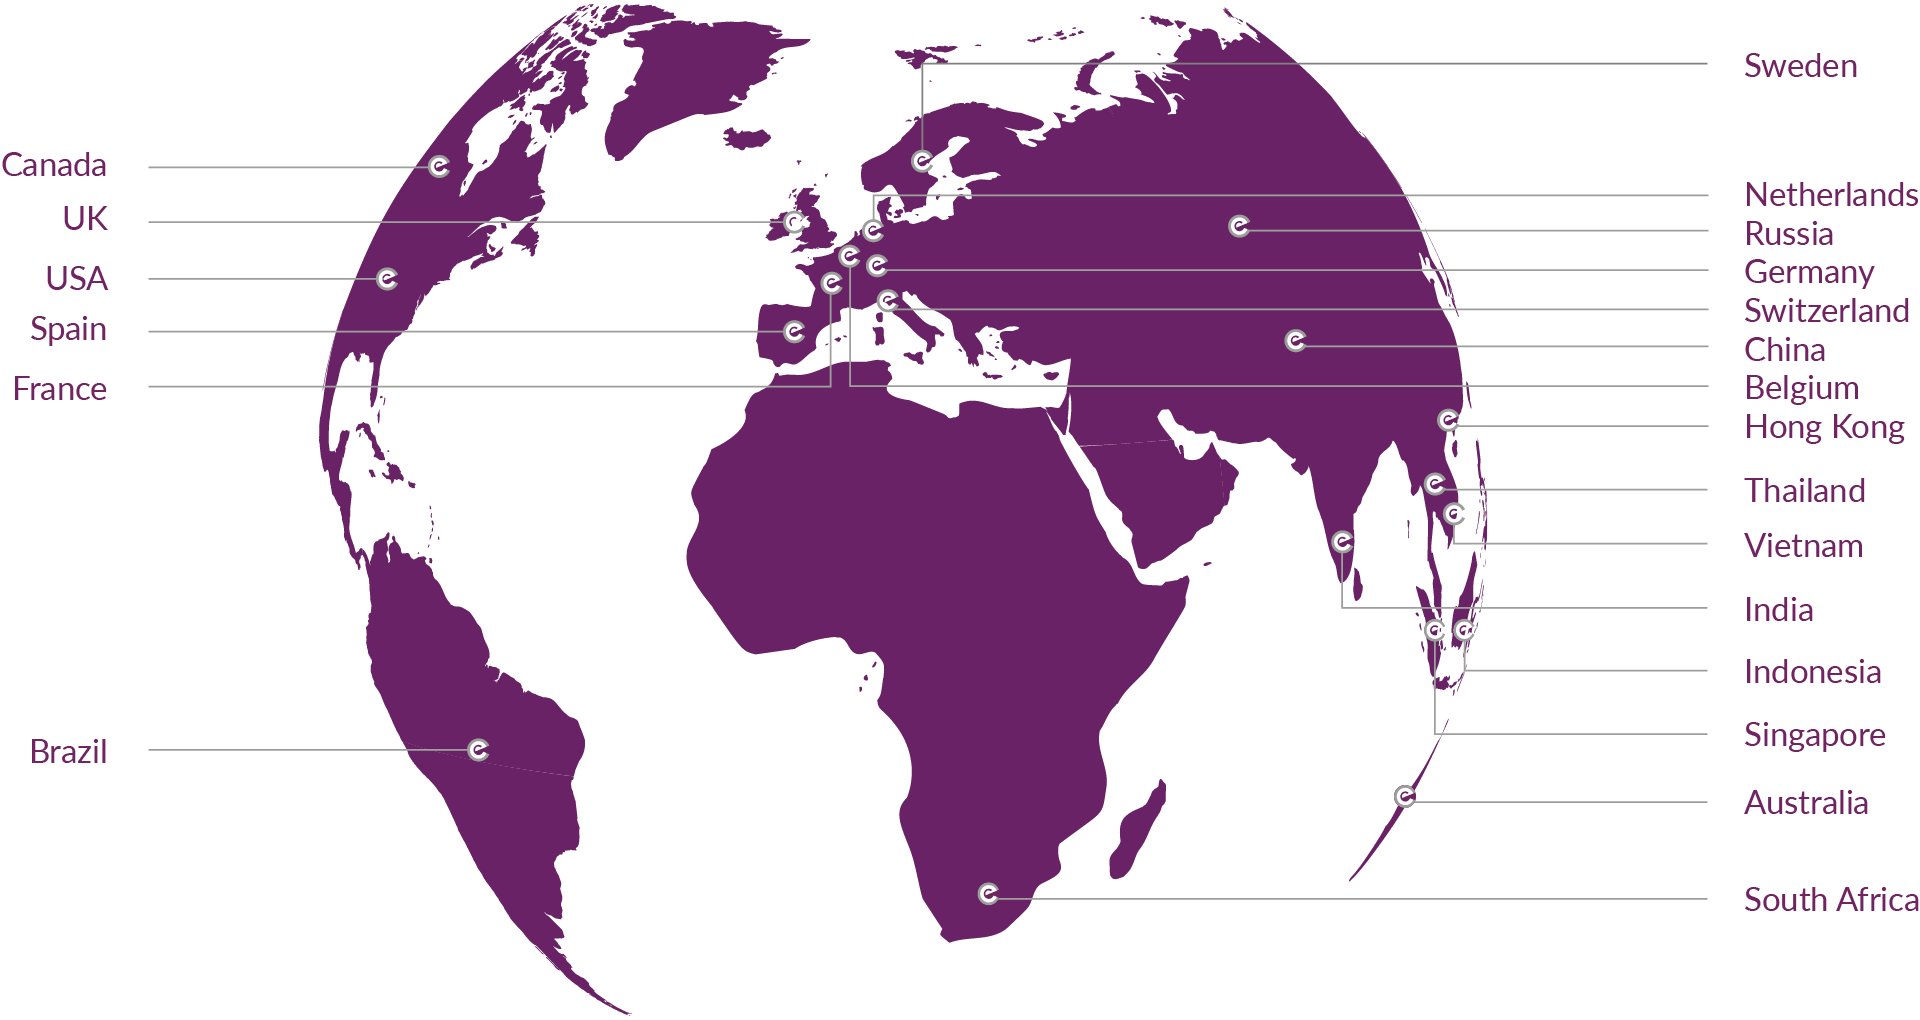 Criticaleye Membership - Countries covered